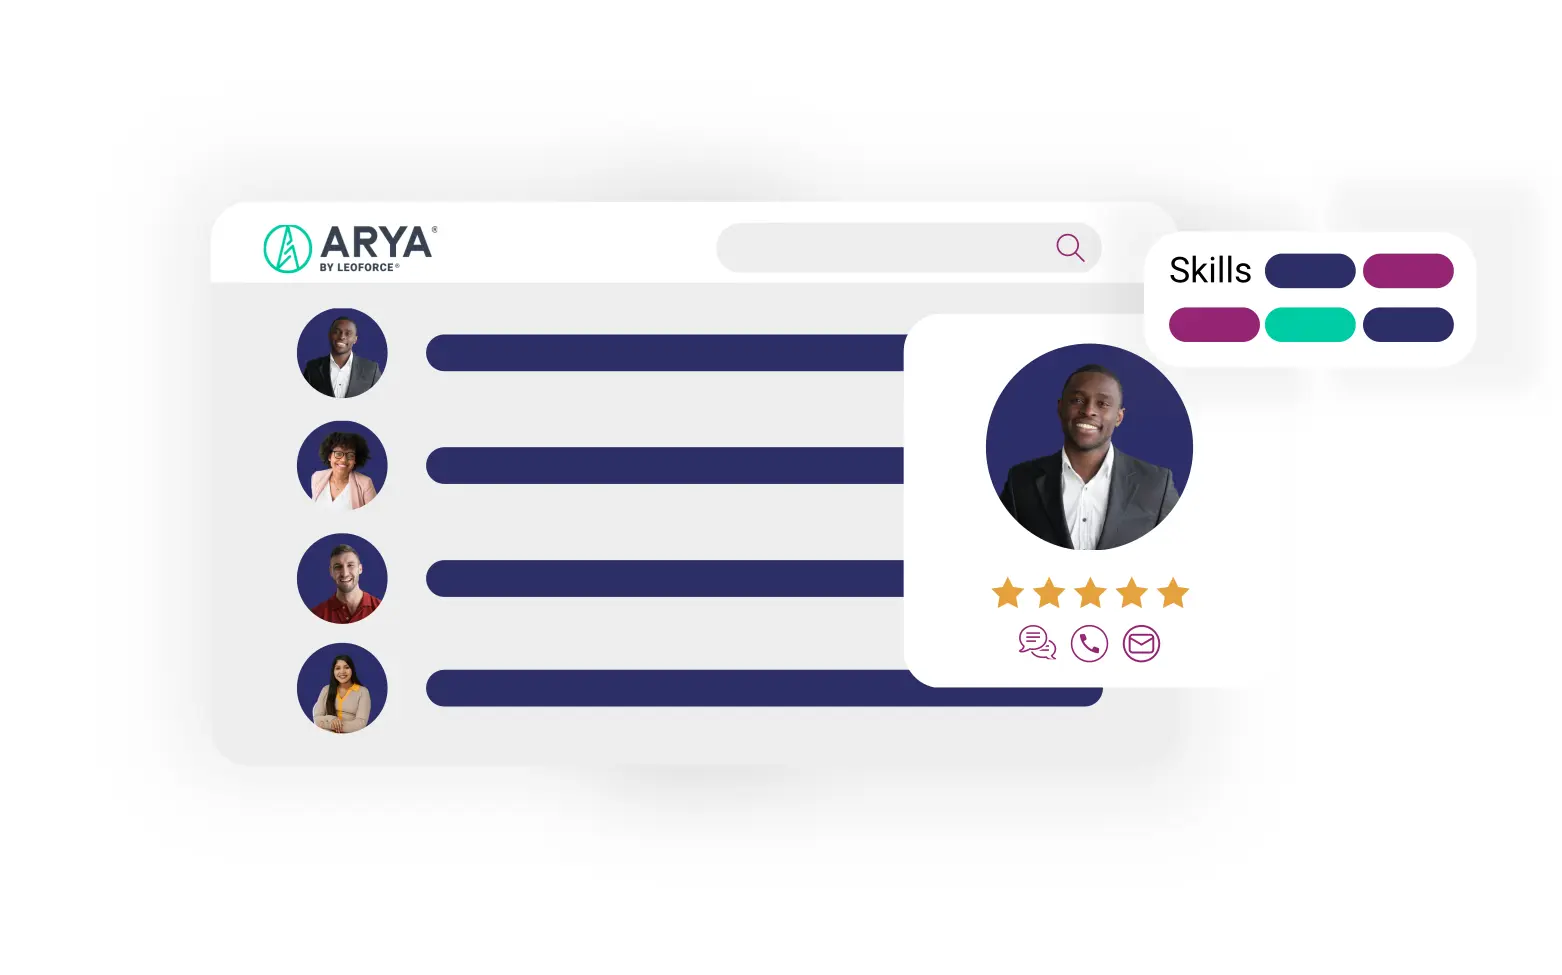 A user interface depicting a candidate search tool by ARYA. The interface shows a list of candidate profiles with photos on the left side and a detailed view of a selected male candidate on the right, featuring a five-star rating and icons highlighting skills.